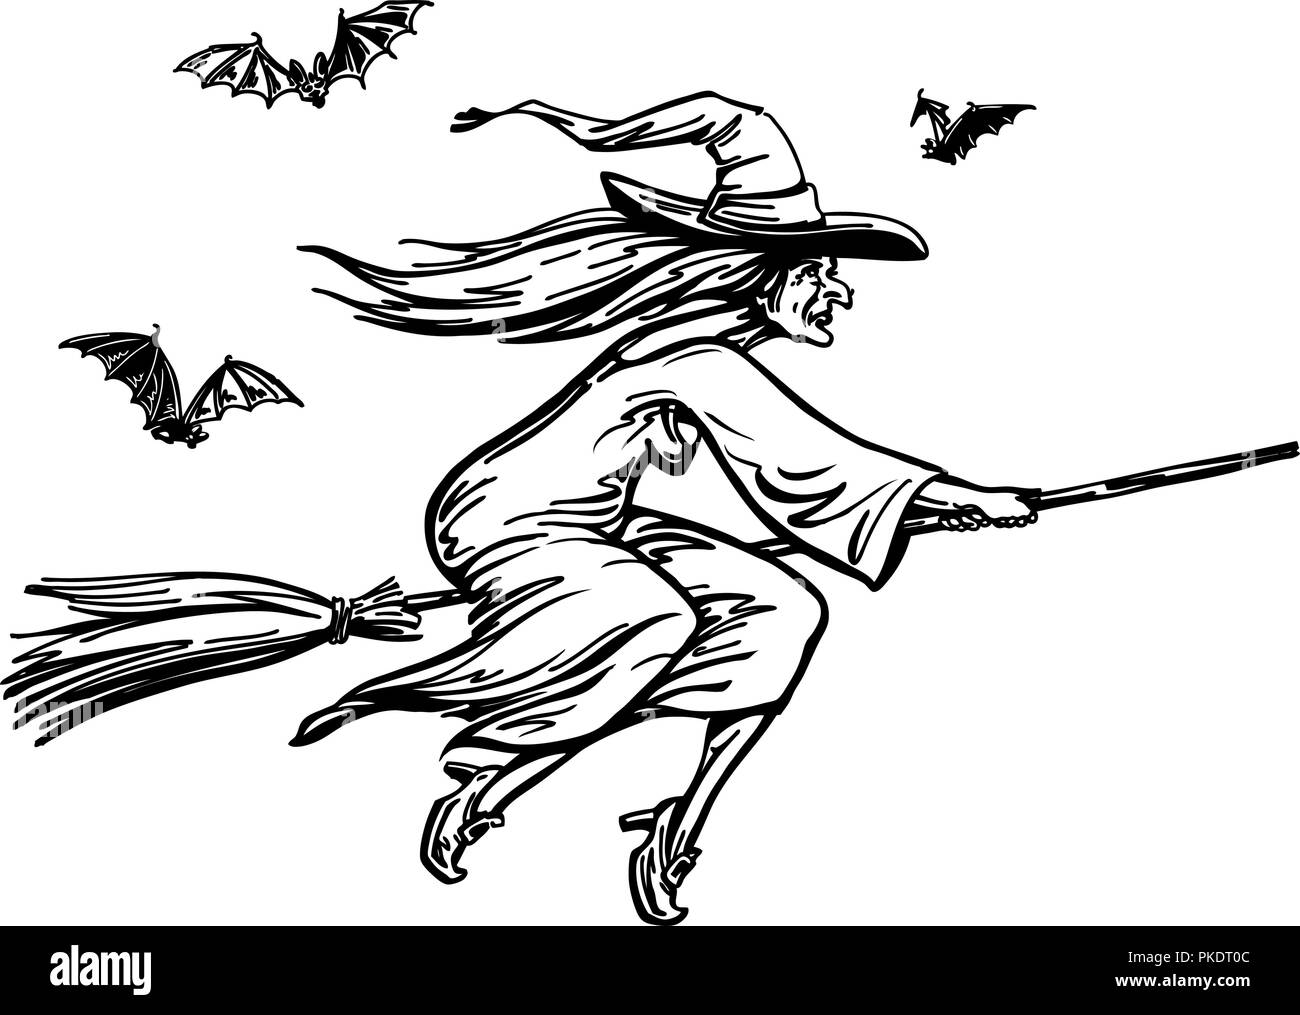 Witch flying on broomstick. Halloween sketch, vector illustration Stock Vector